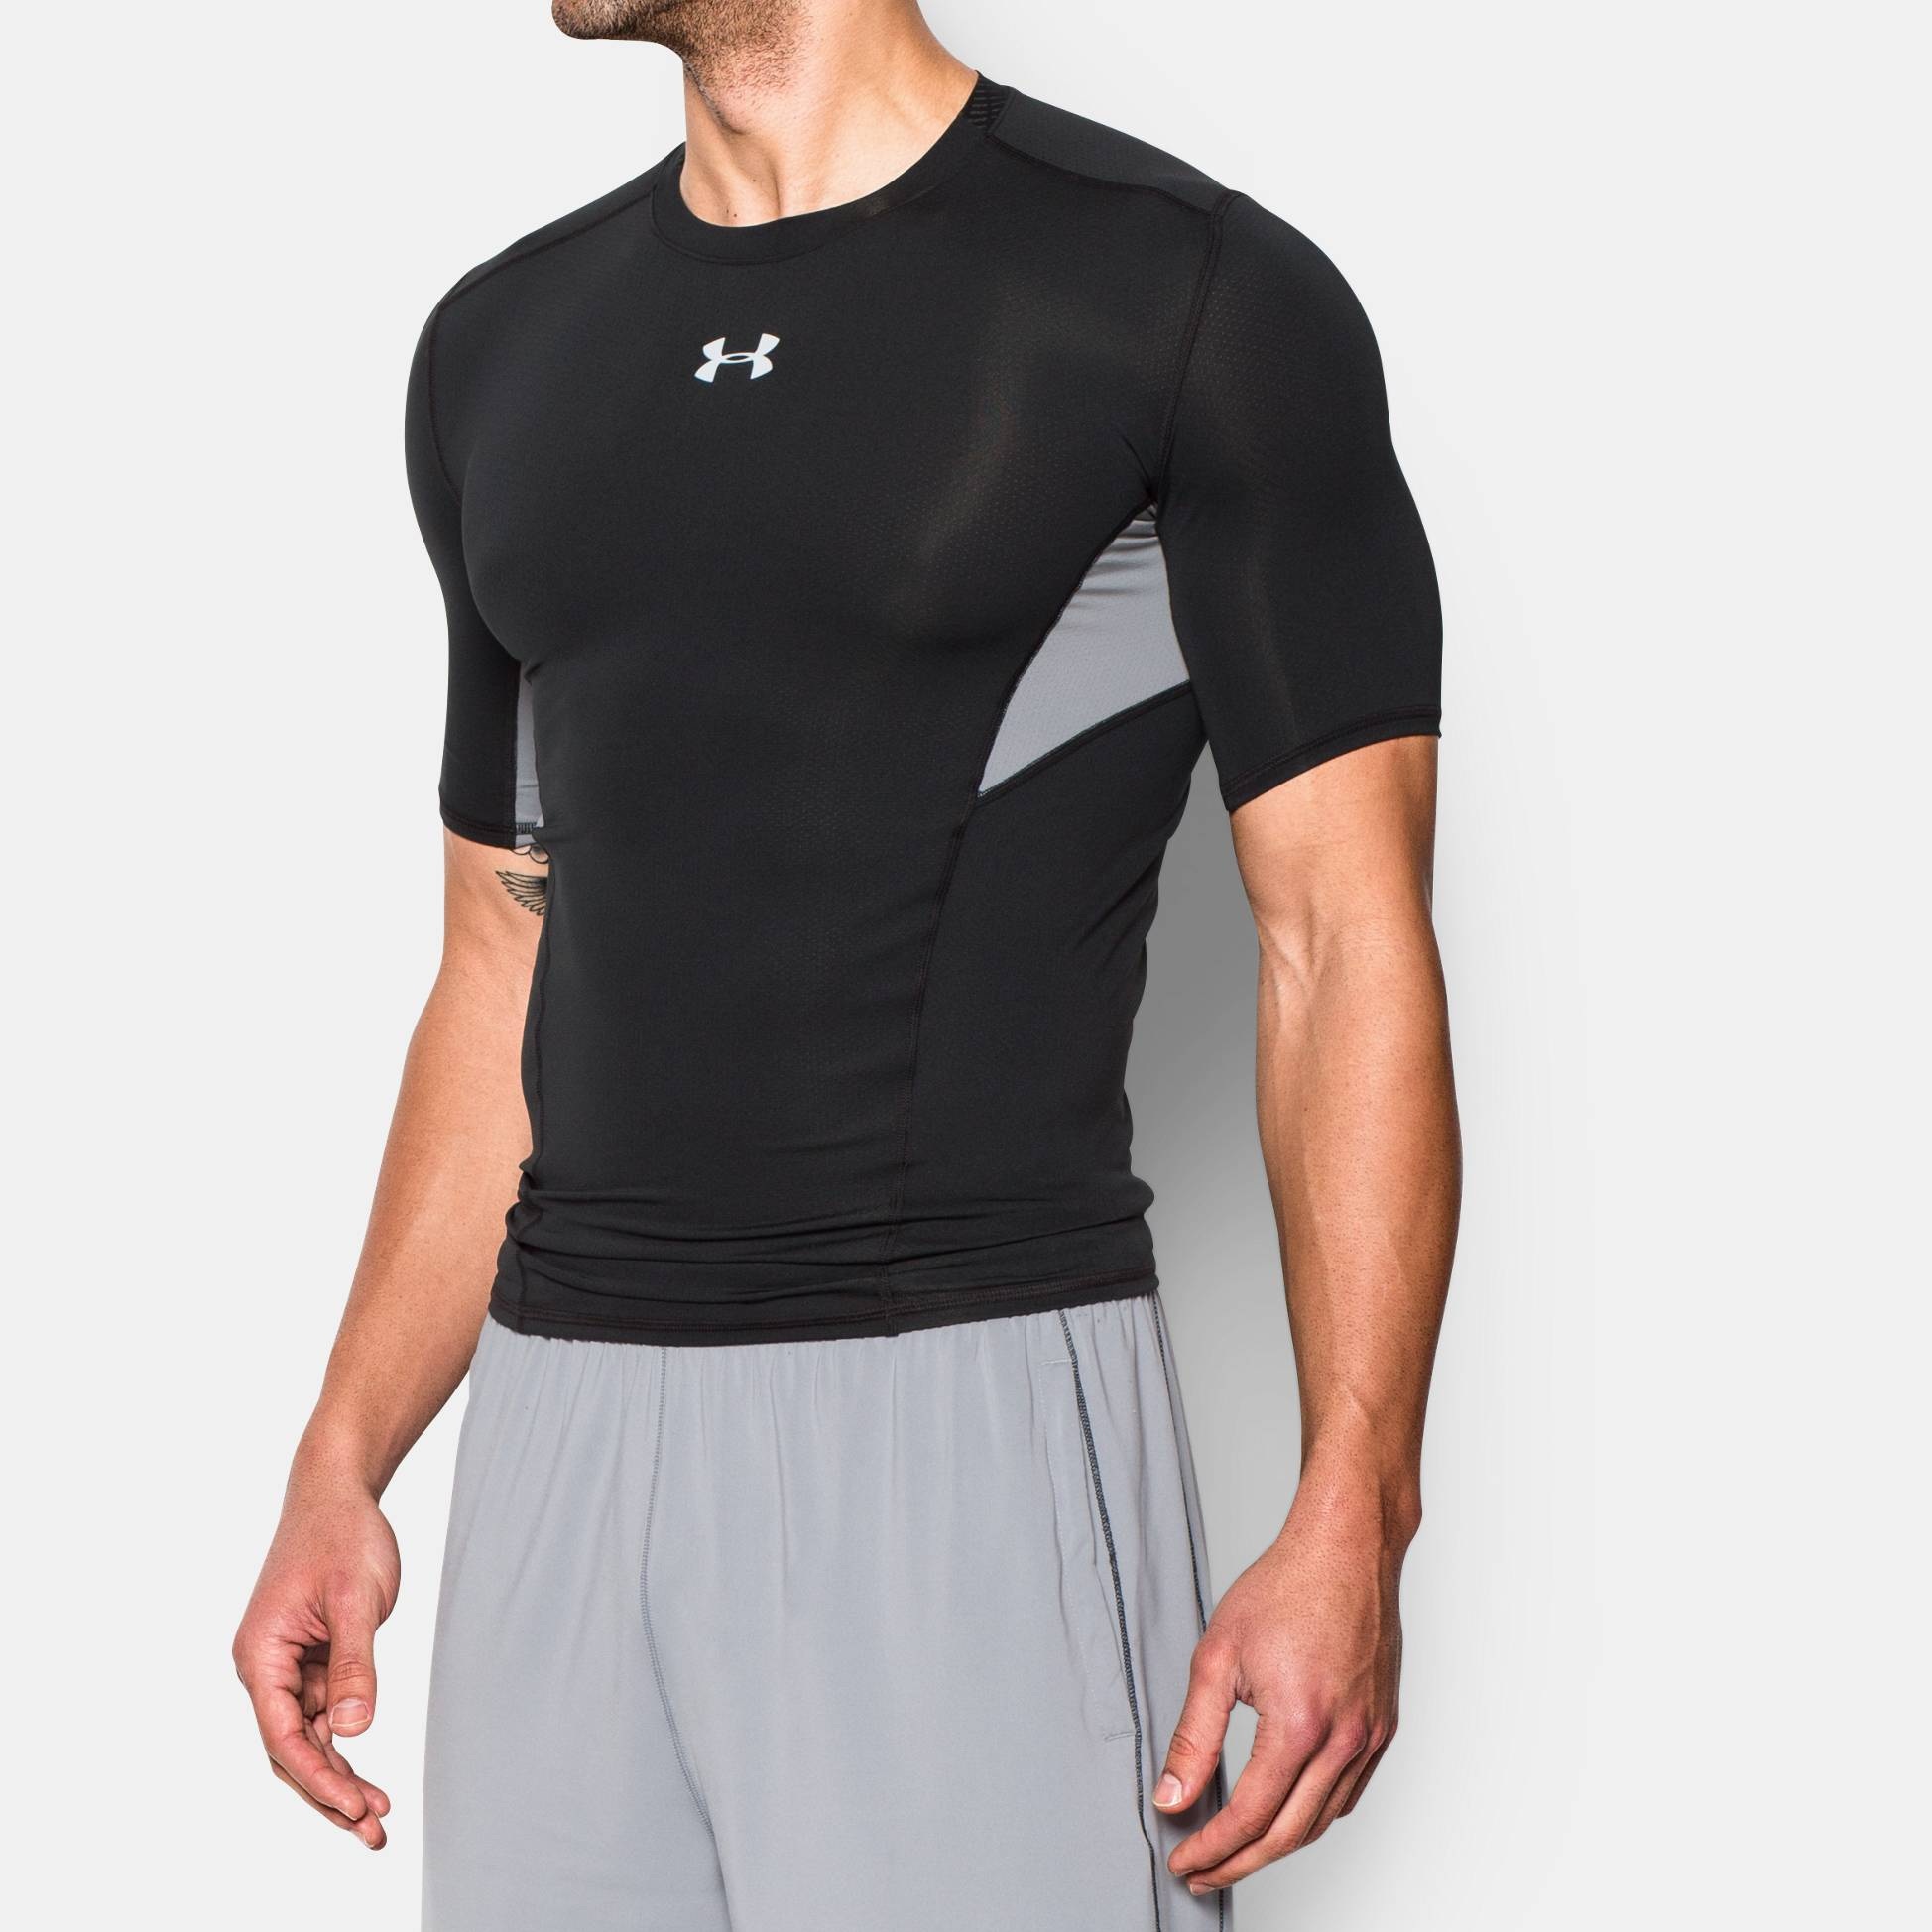 Under Armour Mens Coolswitch Power Sleeve Top